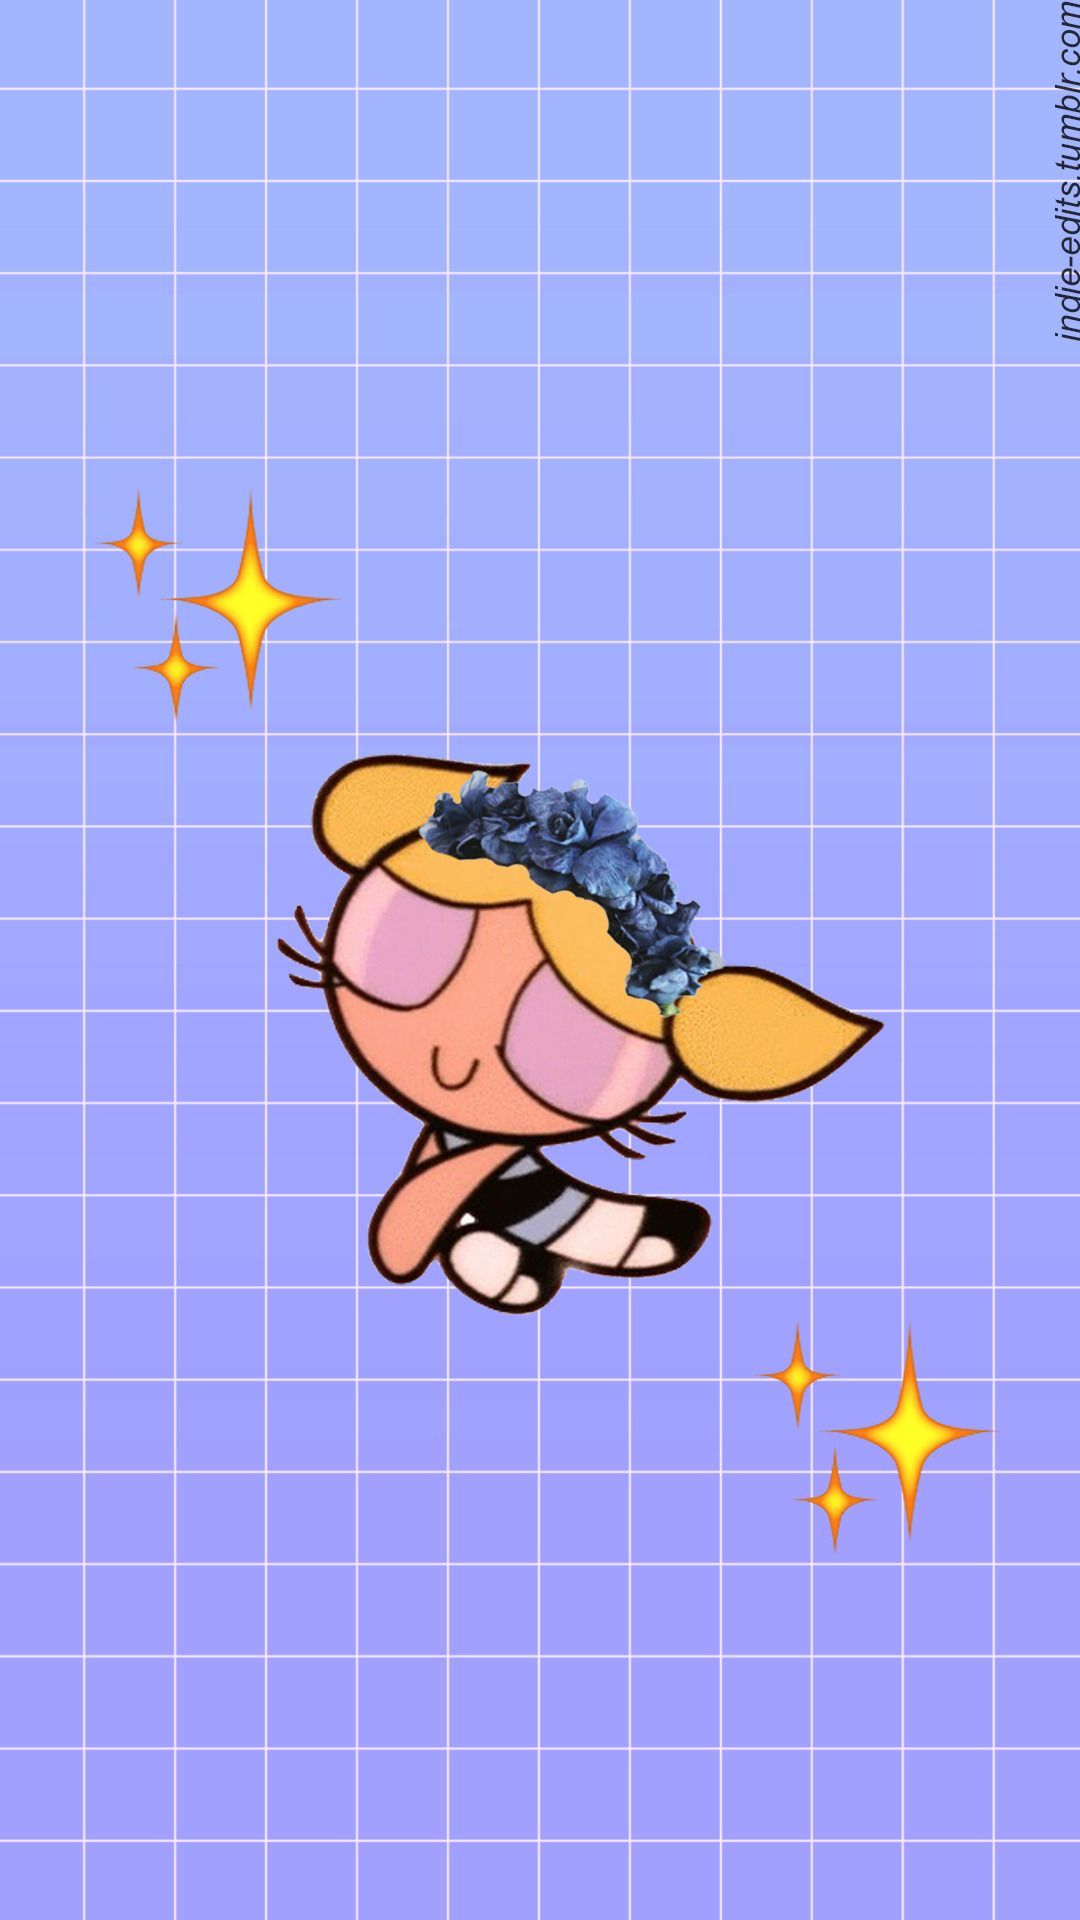 A cartoon character with stars in the background - The Powerpuff Girls